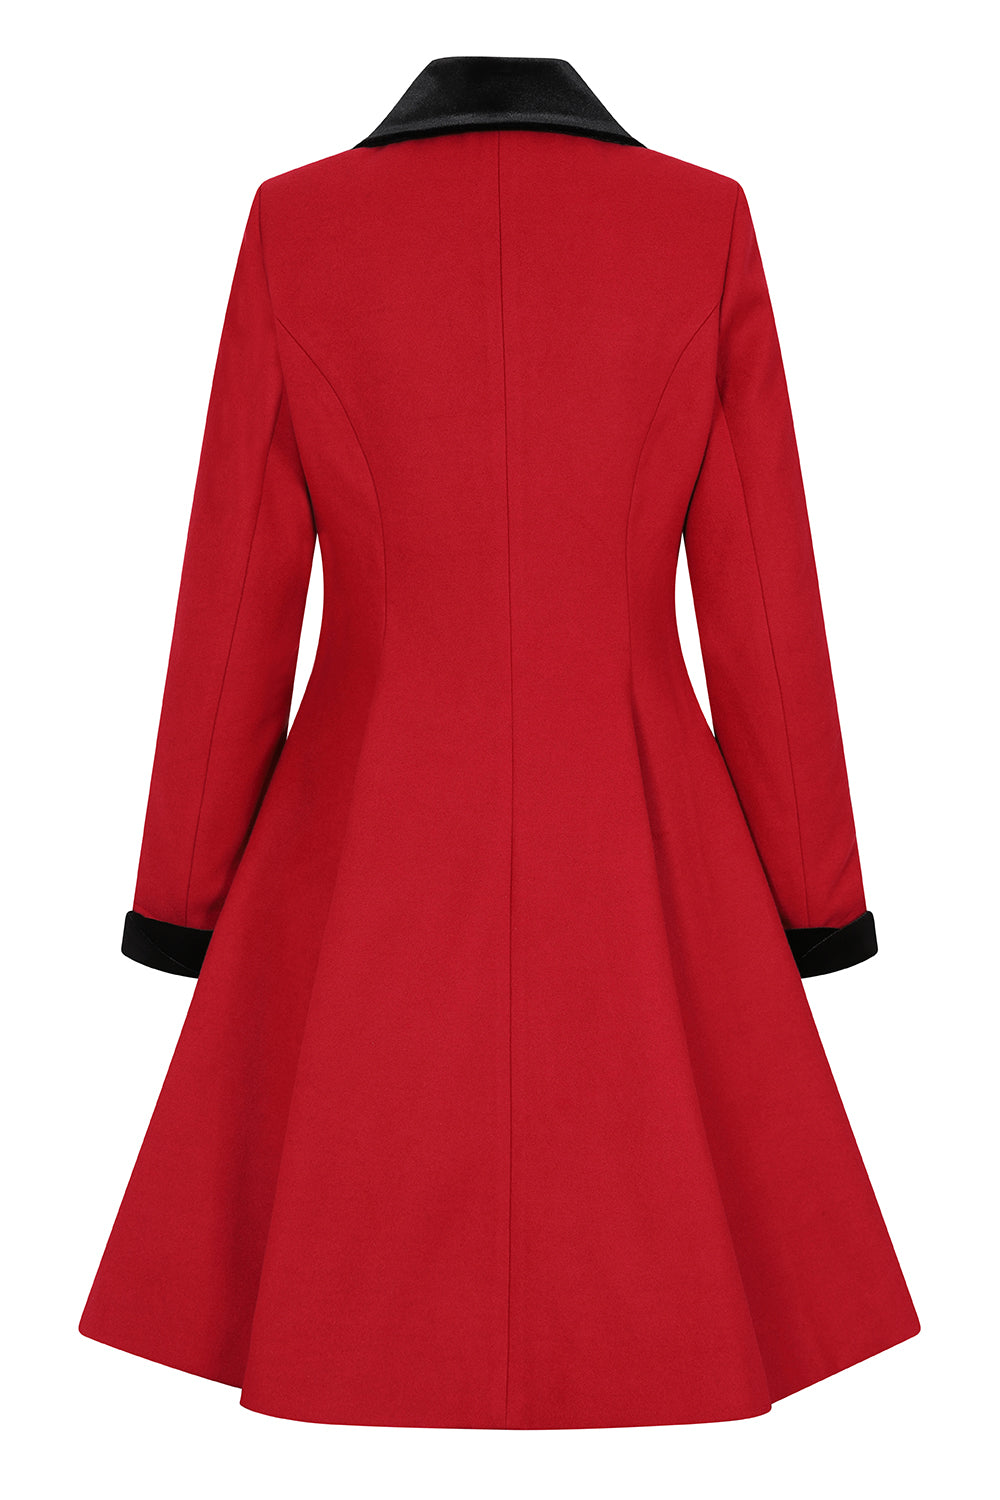 Back of the red Anouk coat by Hell Bunny showing tailored details and the flared design